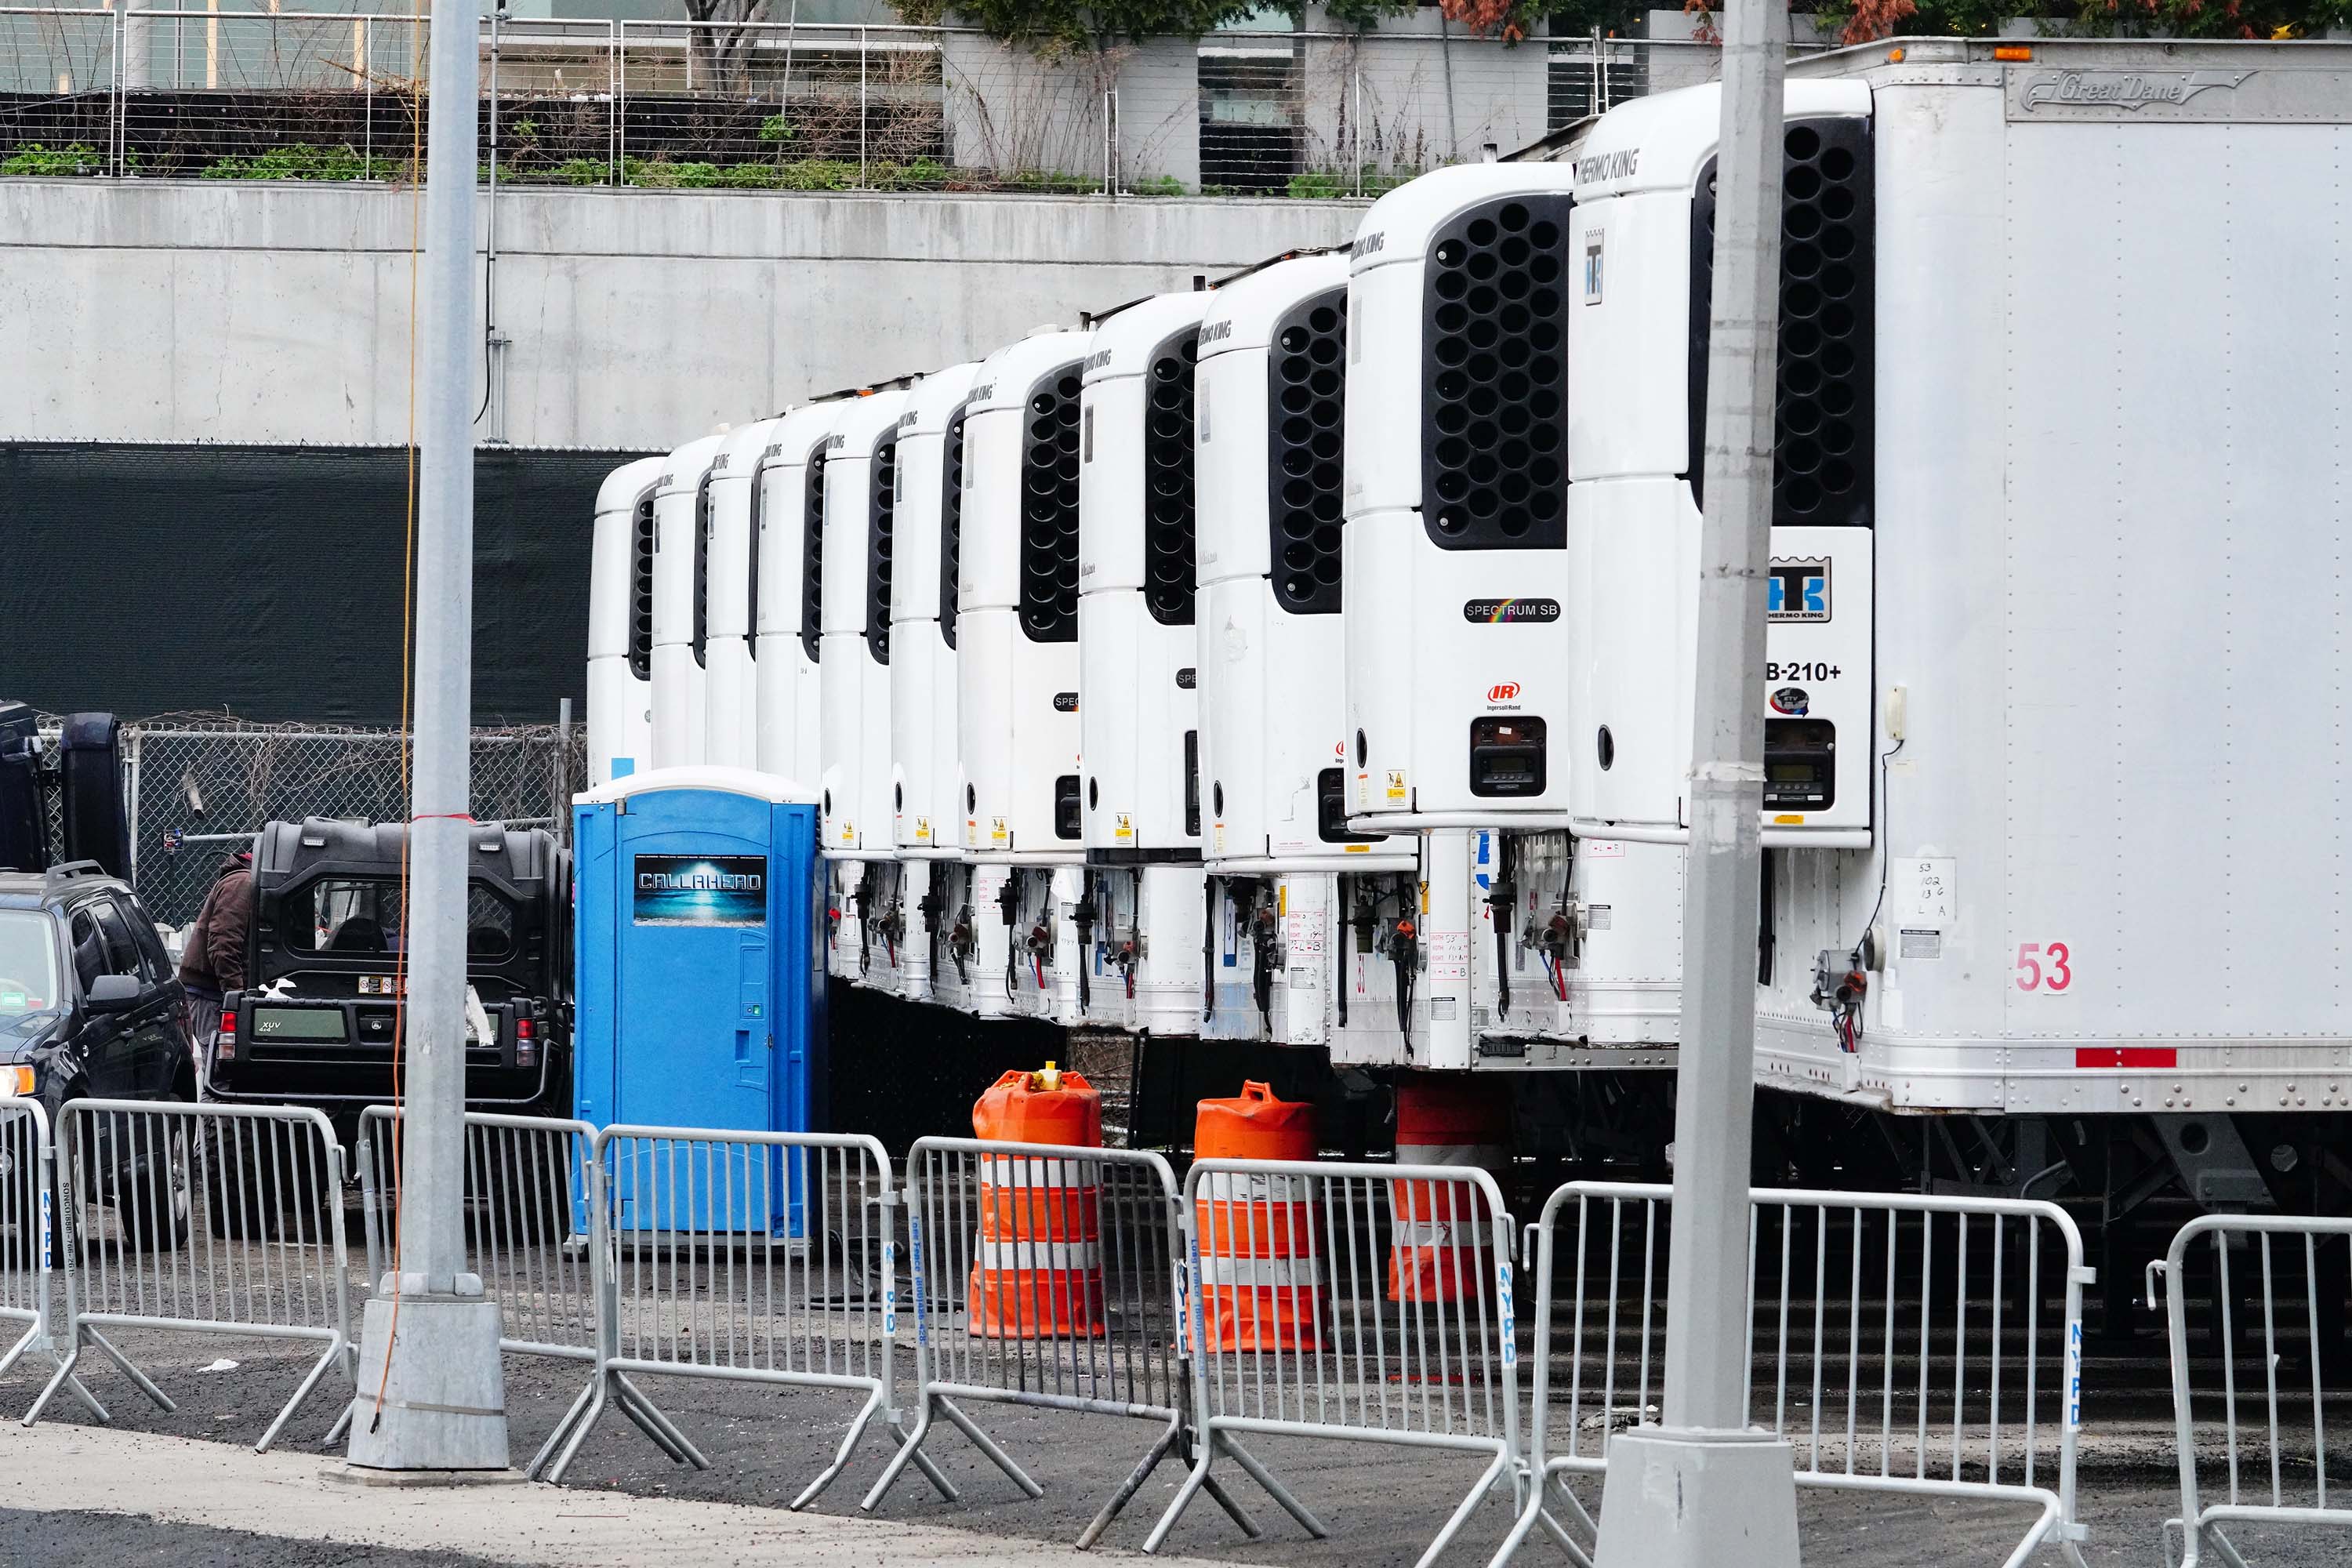 Refrigeration units intended as makeshift morgues are seen parked behind Belleview Hospital Center in New York City on March 30.